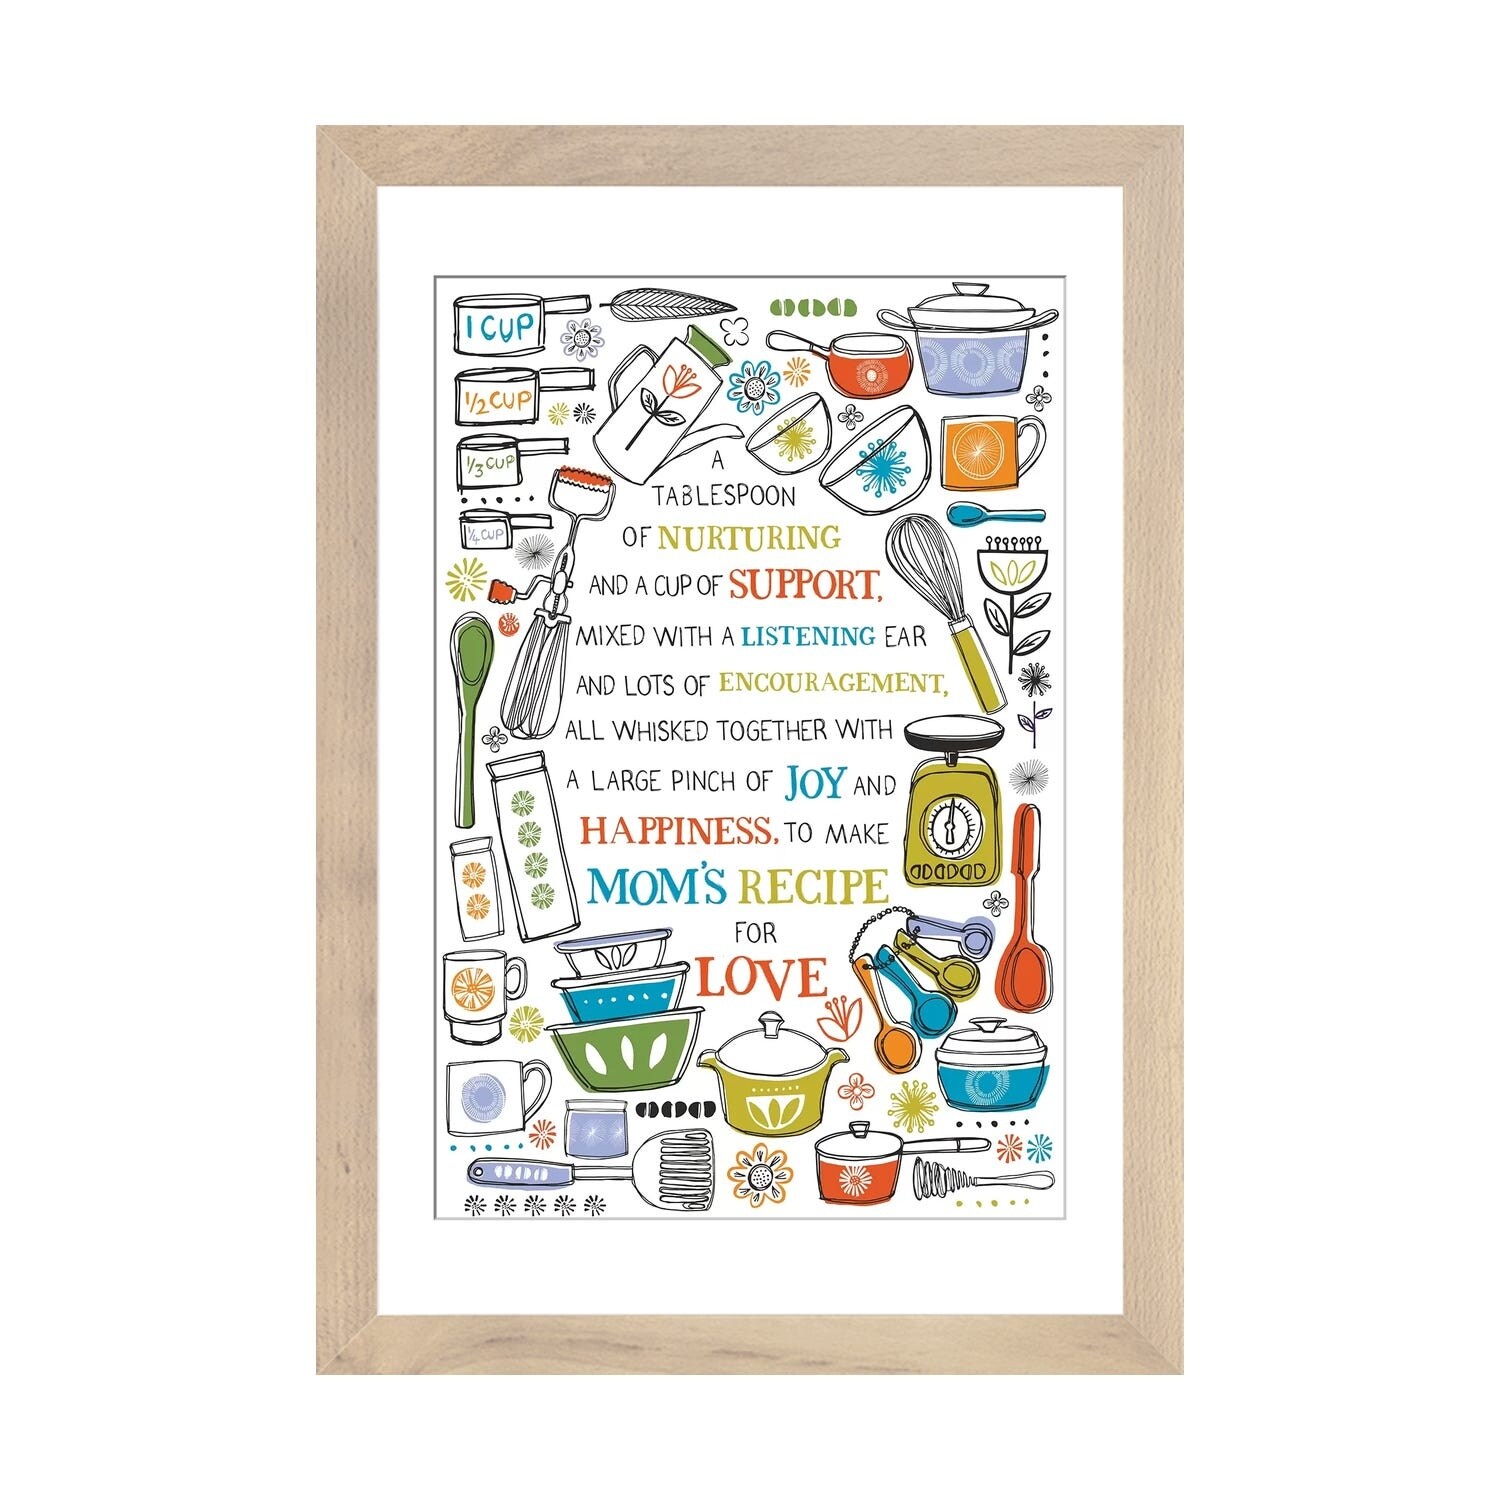 Family Recipe Collection Framed On Paper 3 Pieces by Pam Britton Textual Art